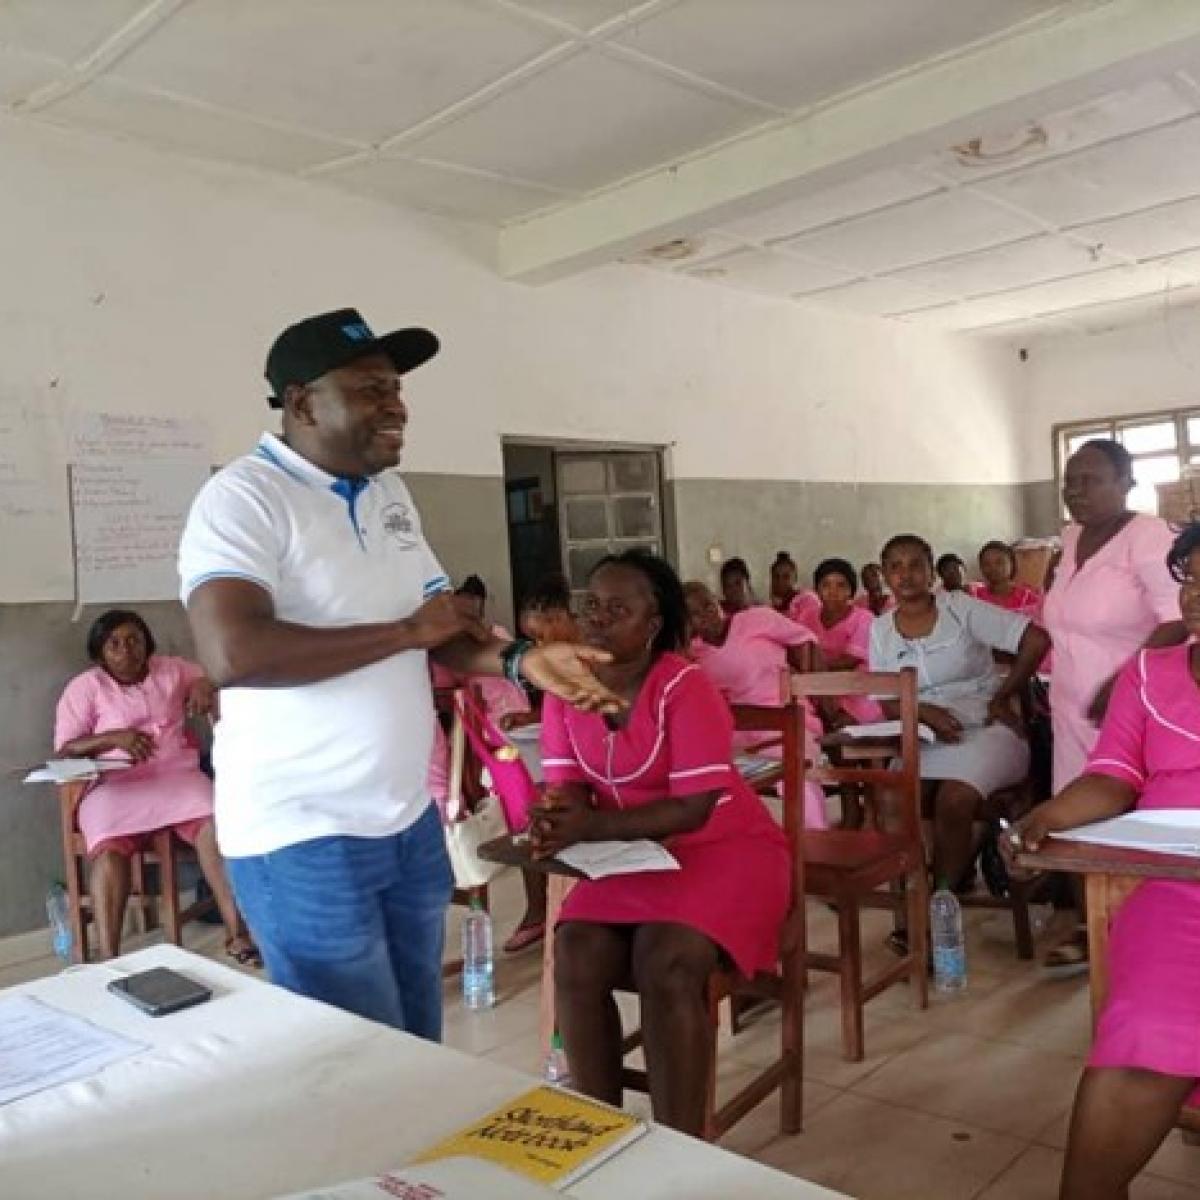 Mr. Micheal A N’dolie from District Health Management Team facilitating the PMI supported capacity building session for Primary Health Unit staff in Pujehun District, Southern Sierra Leone. 